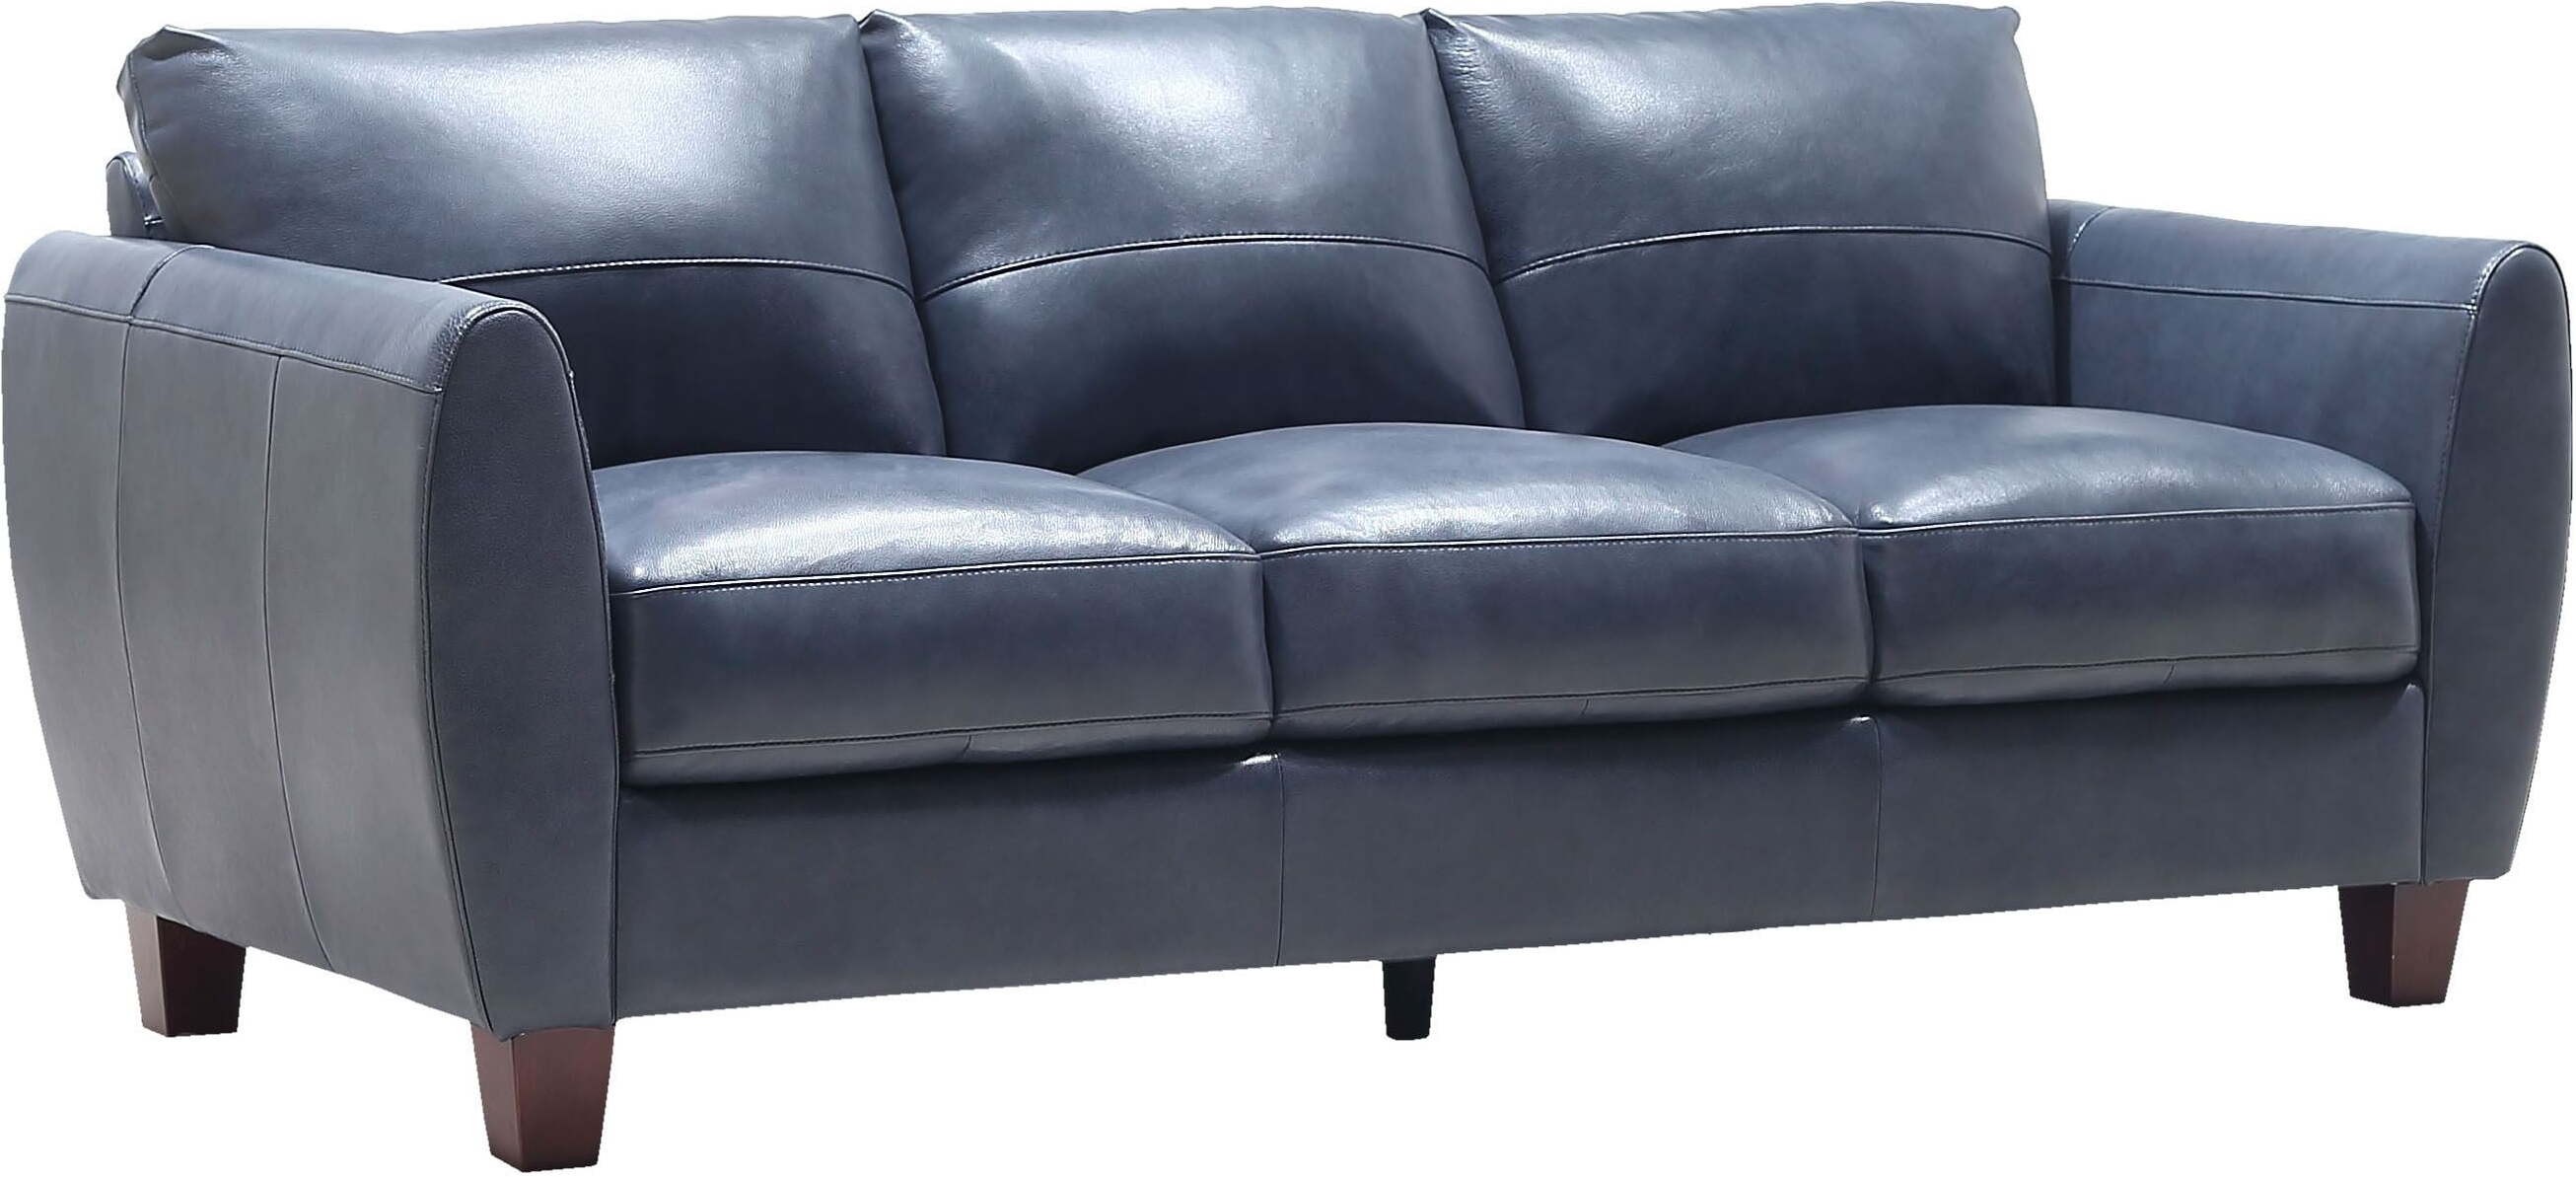 blue leather sofa in louisville ky